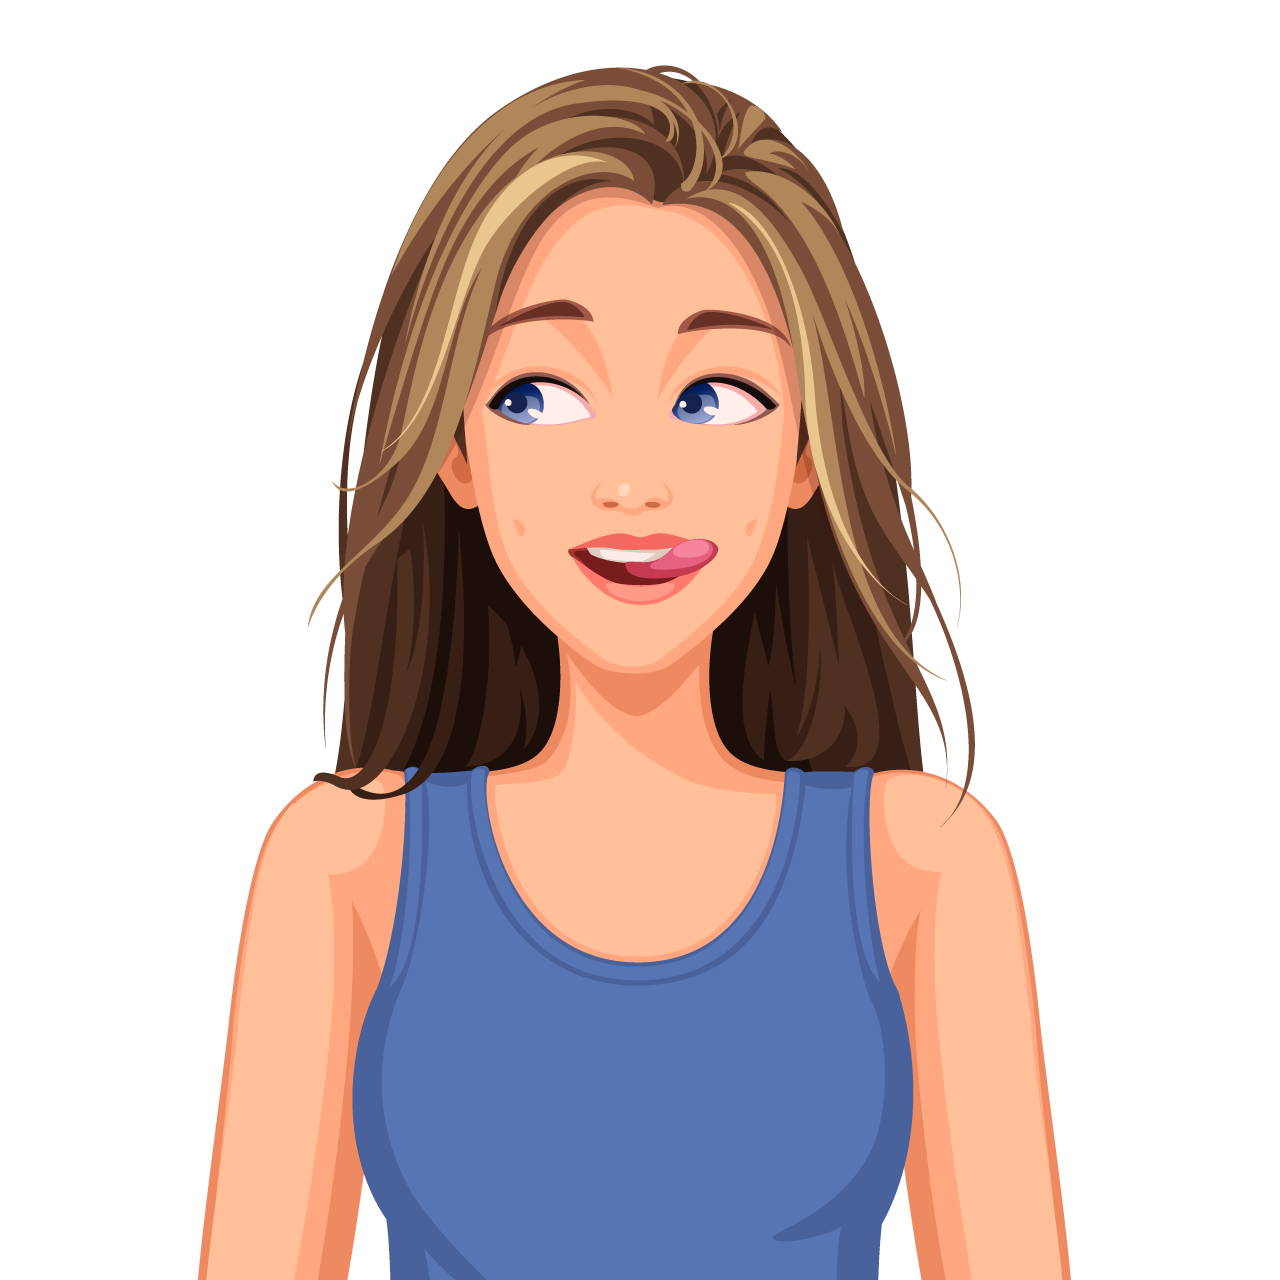 Illustration-beautiful-woman-with-a-different-facial-expression-clipart-image.png